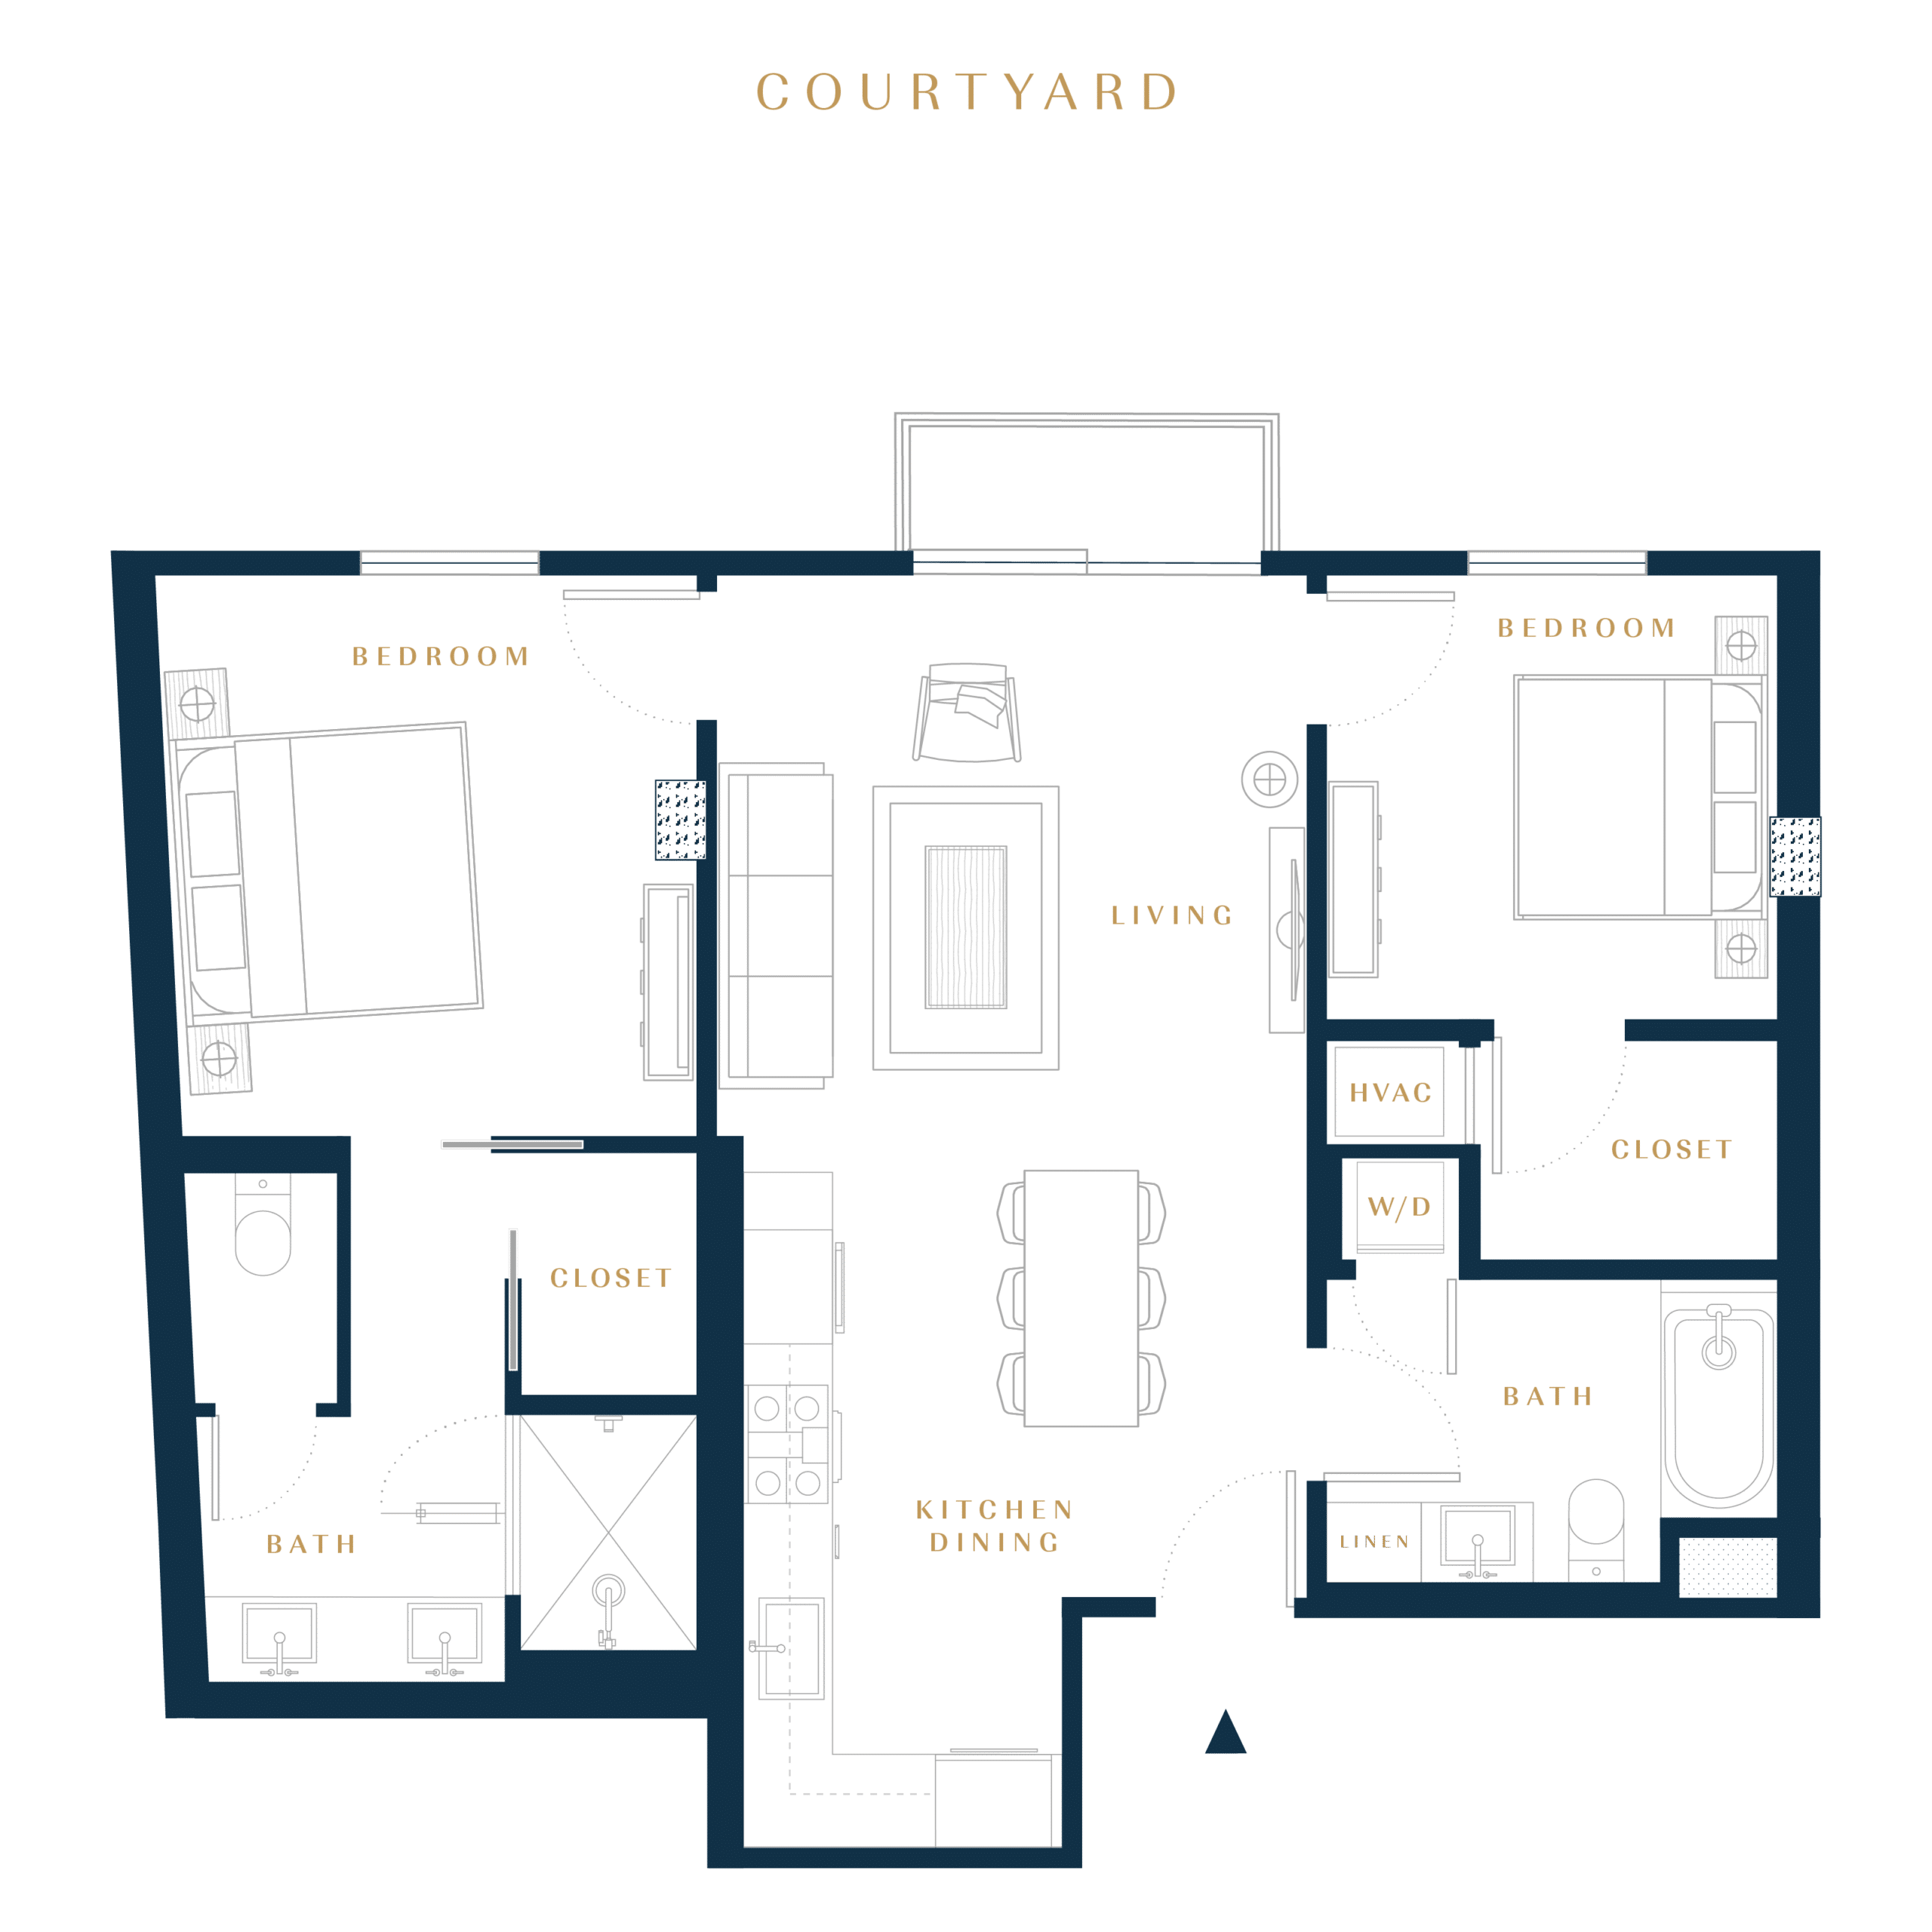 Residence 2F luxury condo floor plan in San Francisco Dogpatch